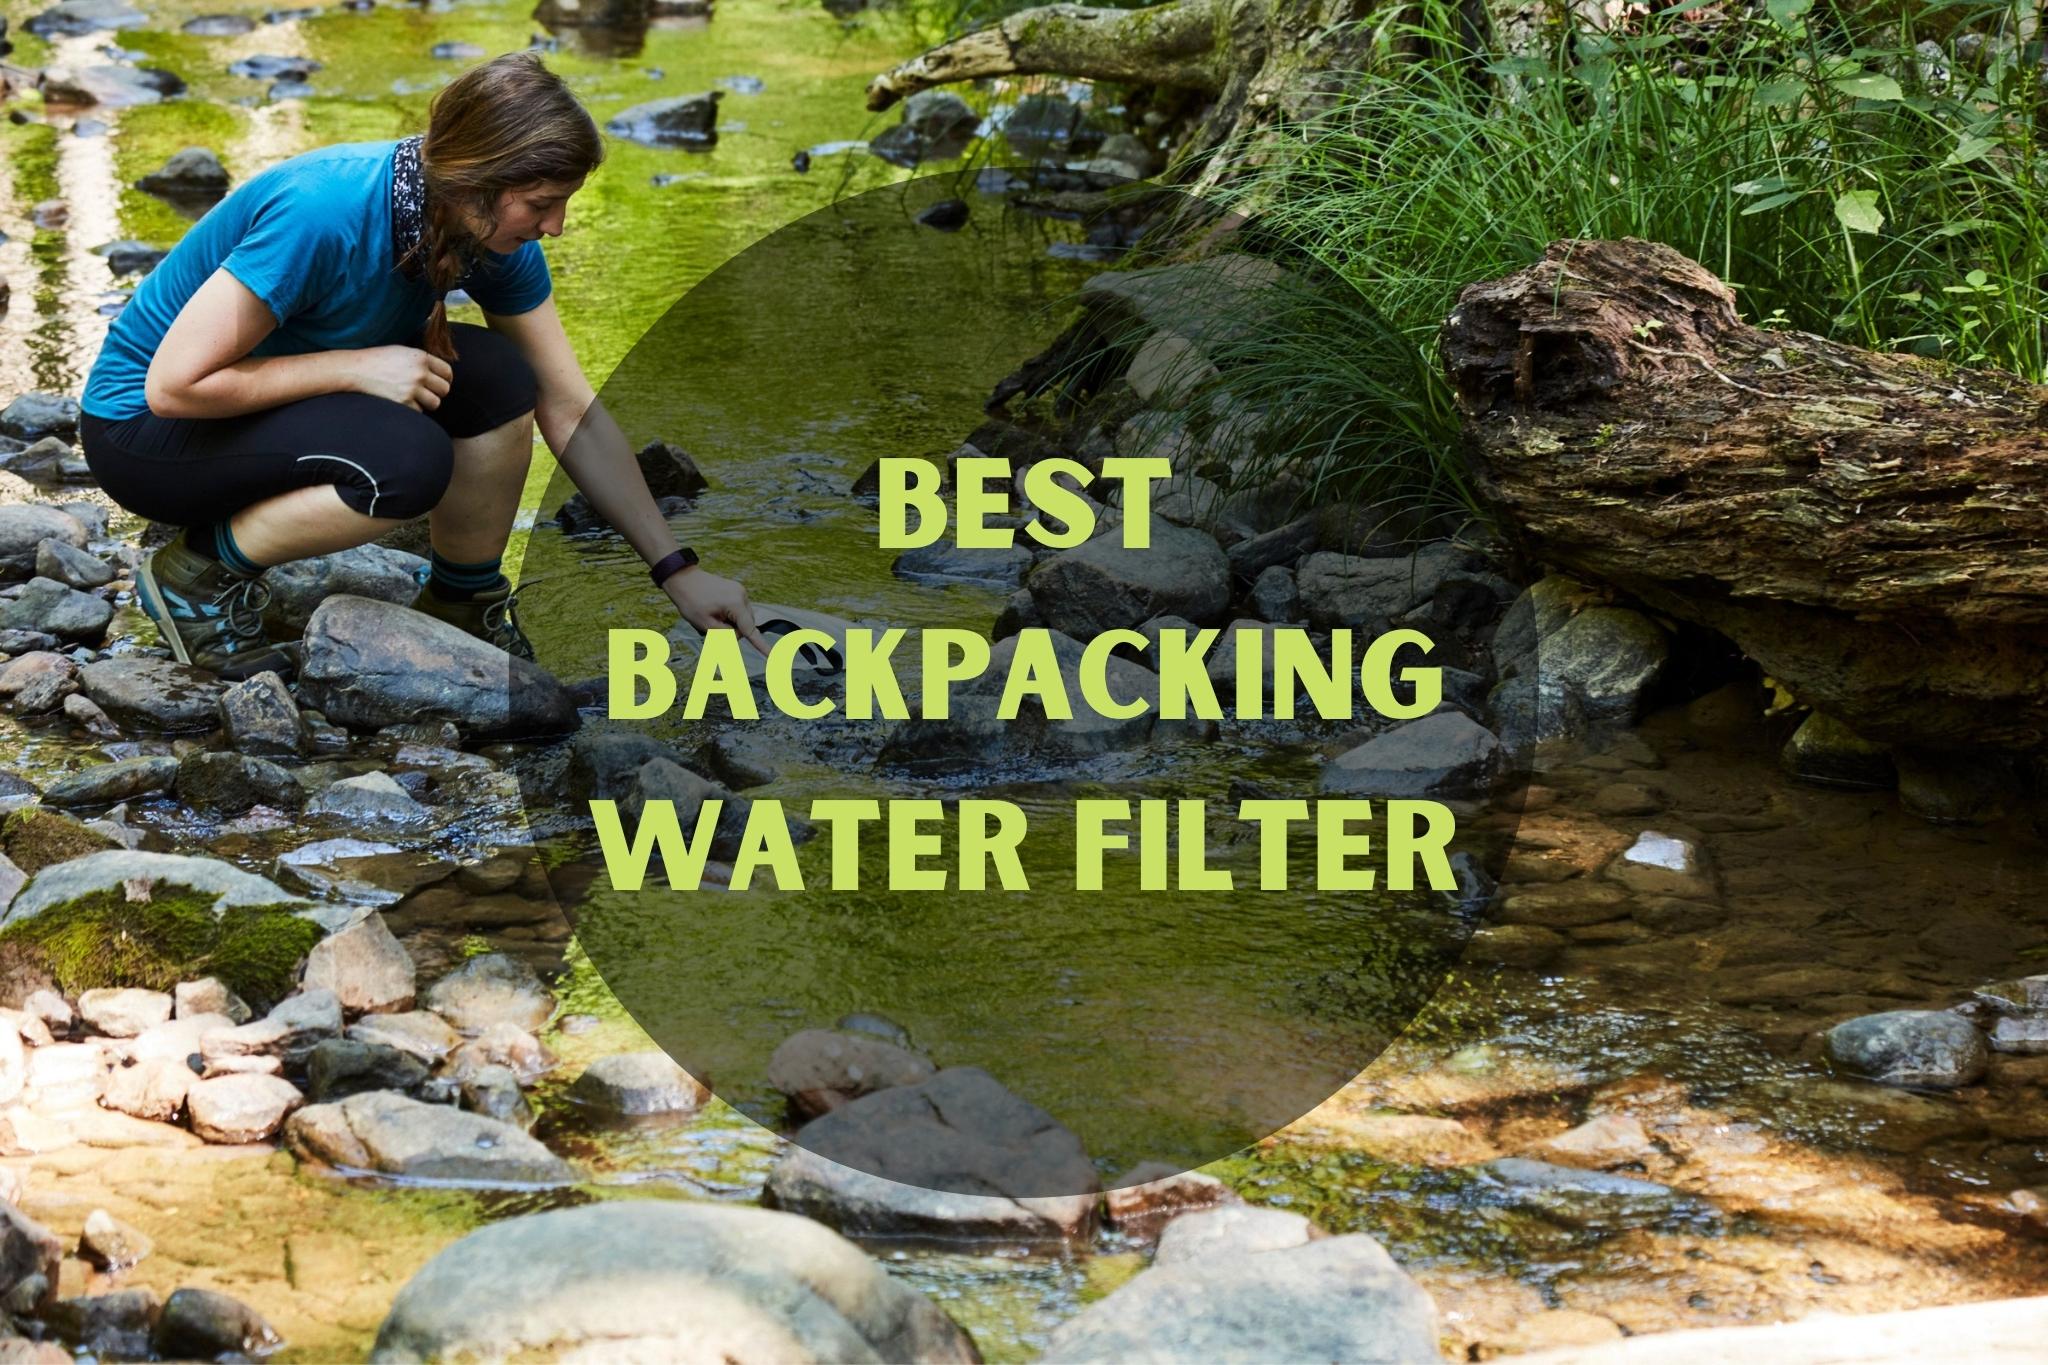 Best Backpacking Water Filter